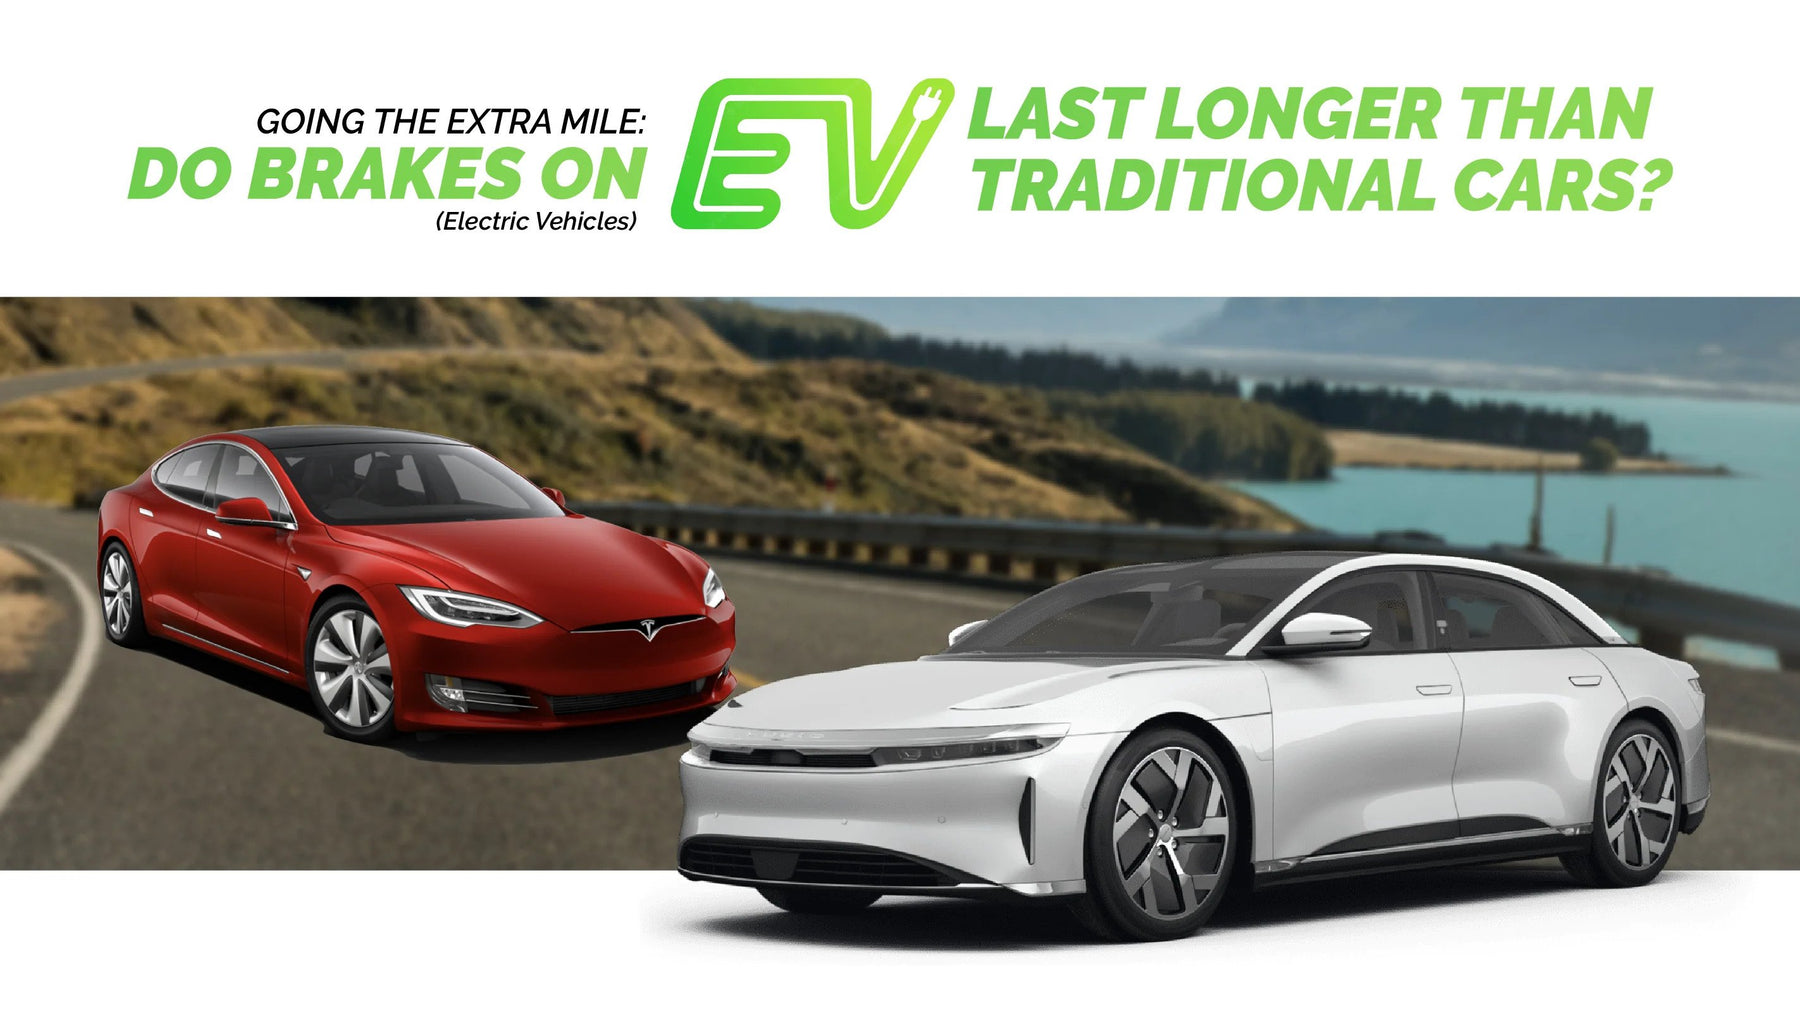 Going the Extra Mile: Do Brakes on Electric Vehicles Last Longer Than Traditional Cars?